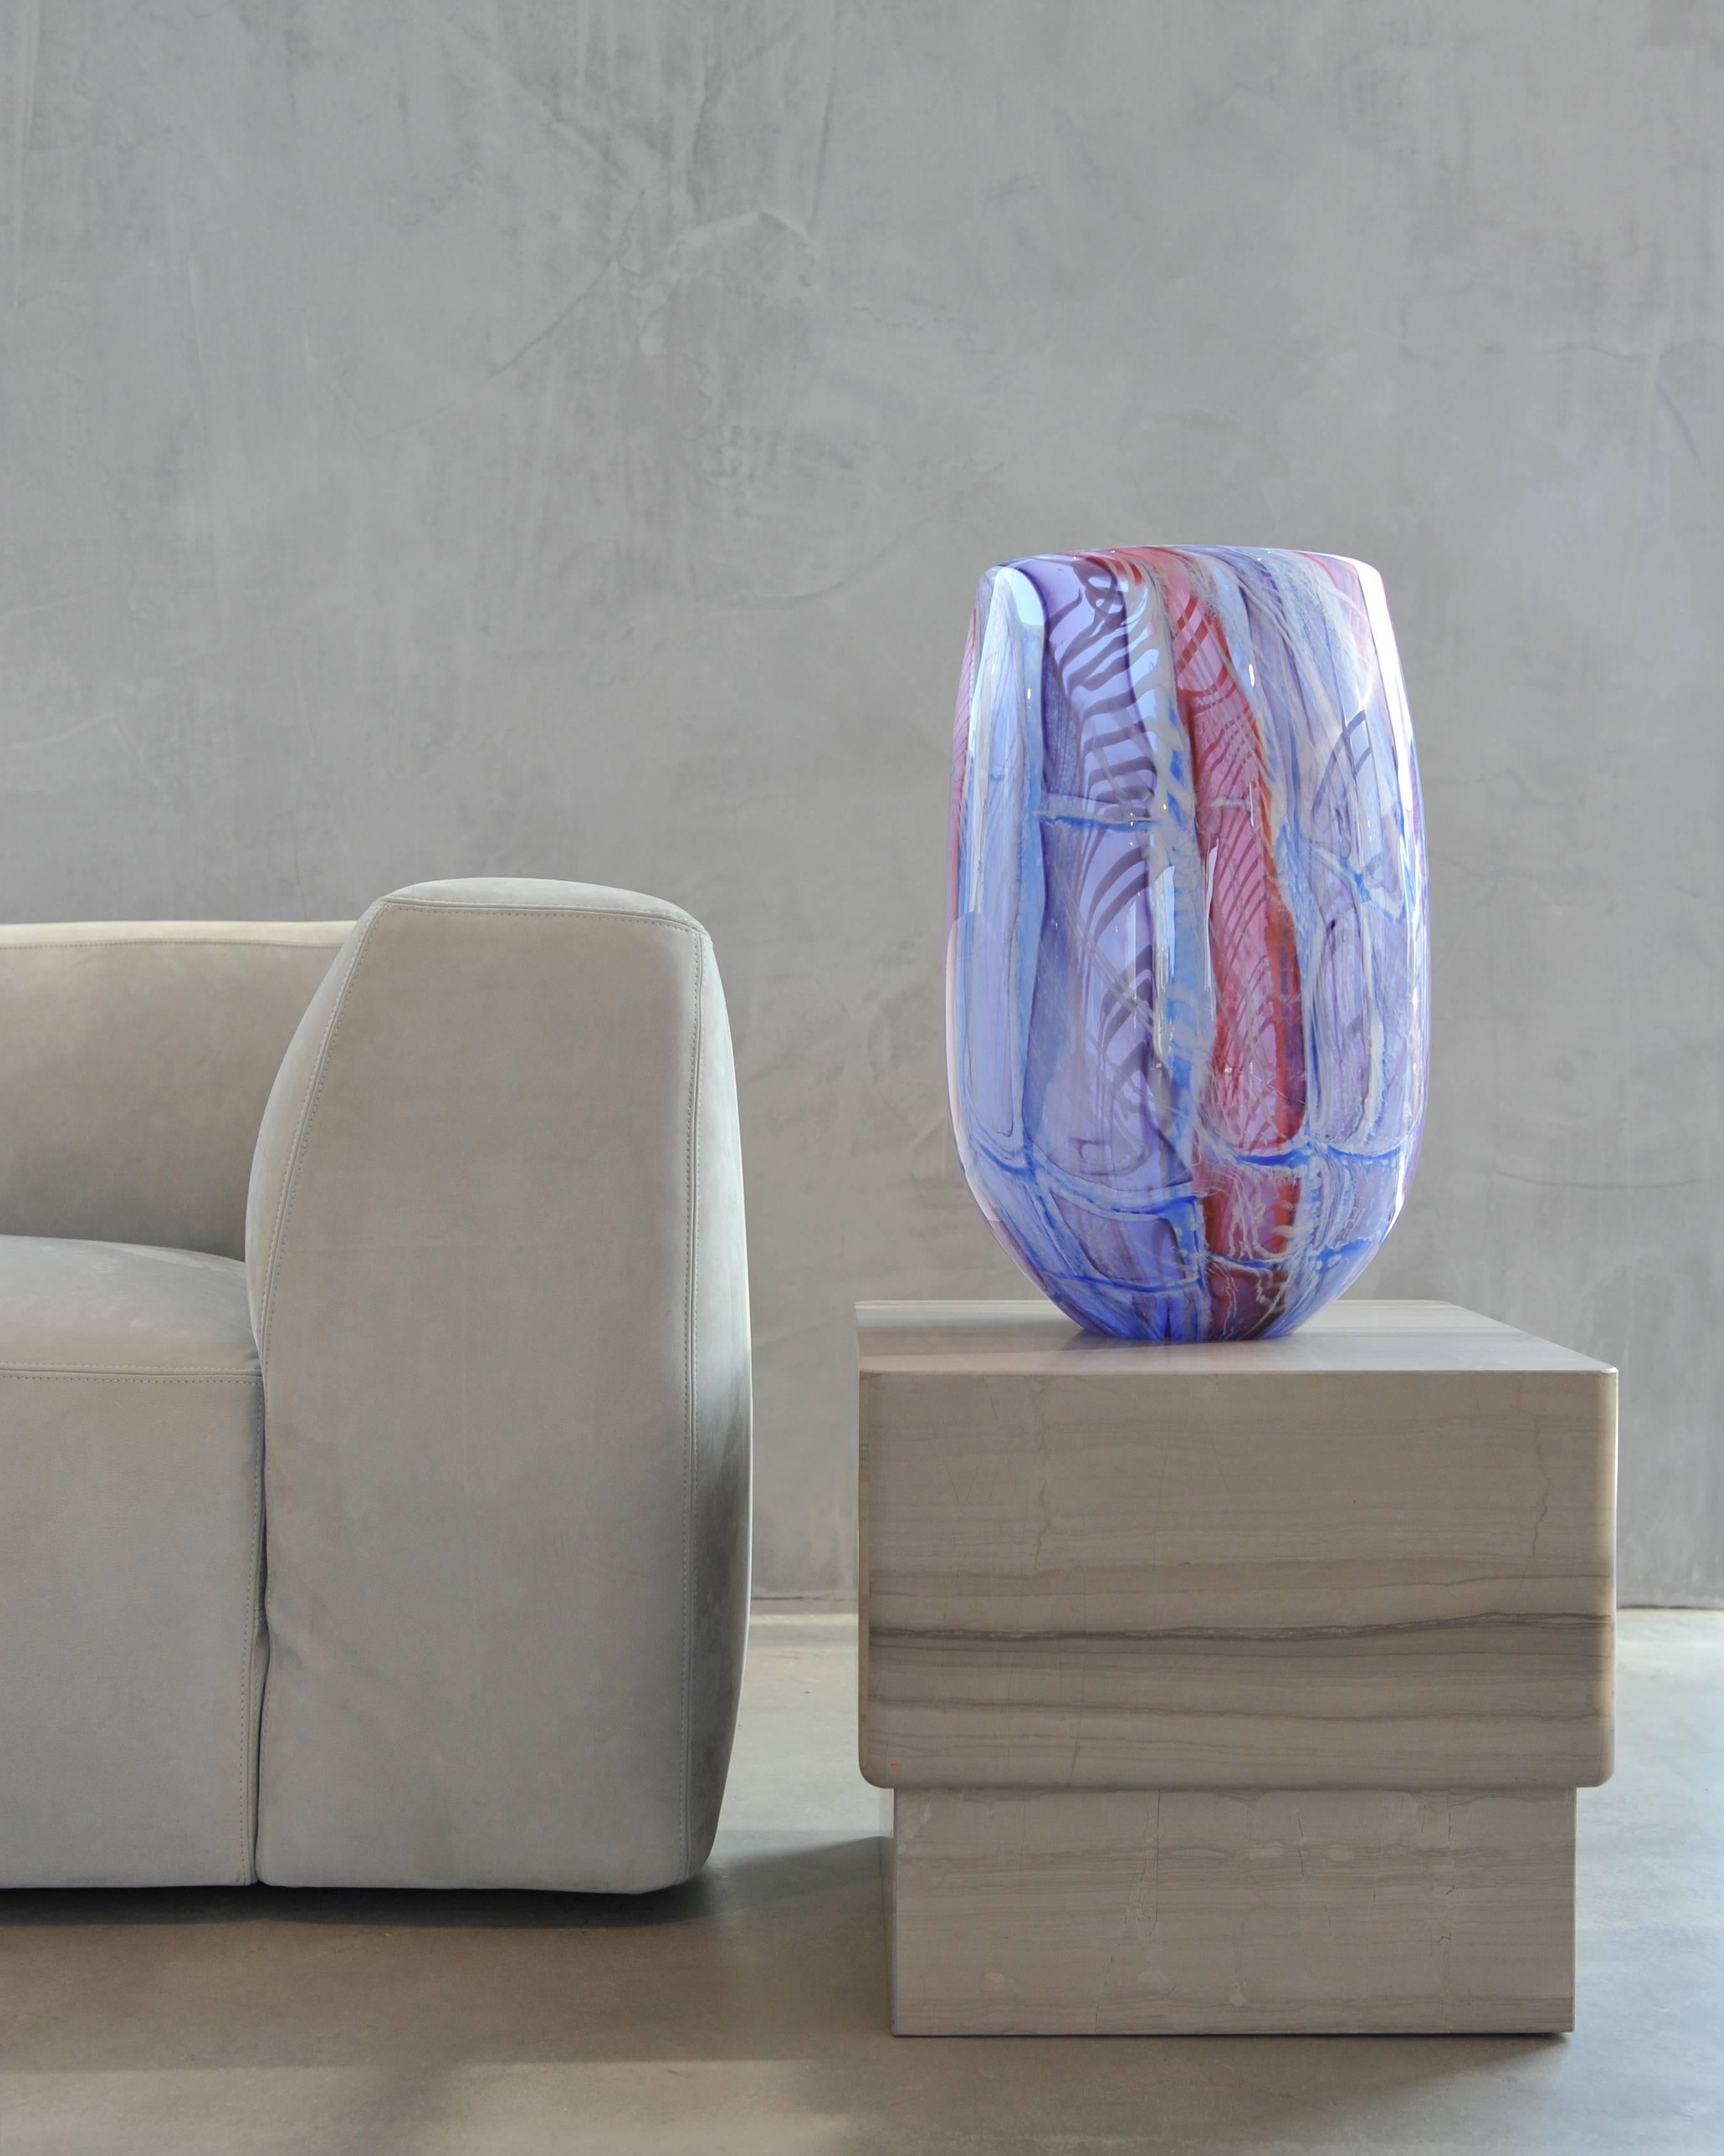 Blown glass tall vase. Murano glass style colors purple, blue, red and white - Sculpture by Richard Price